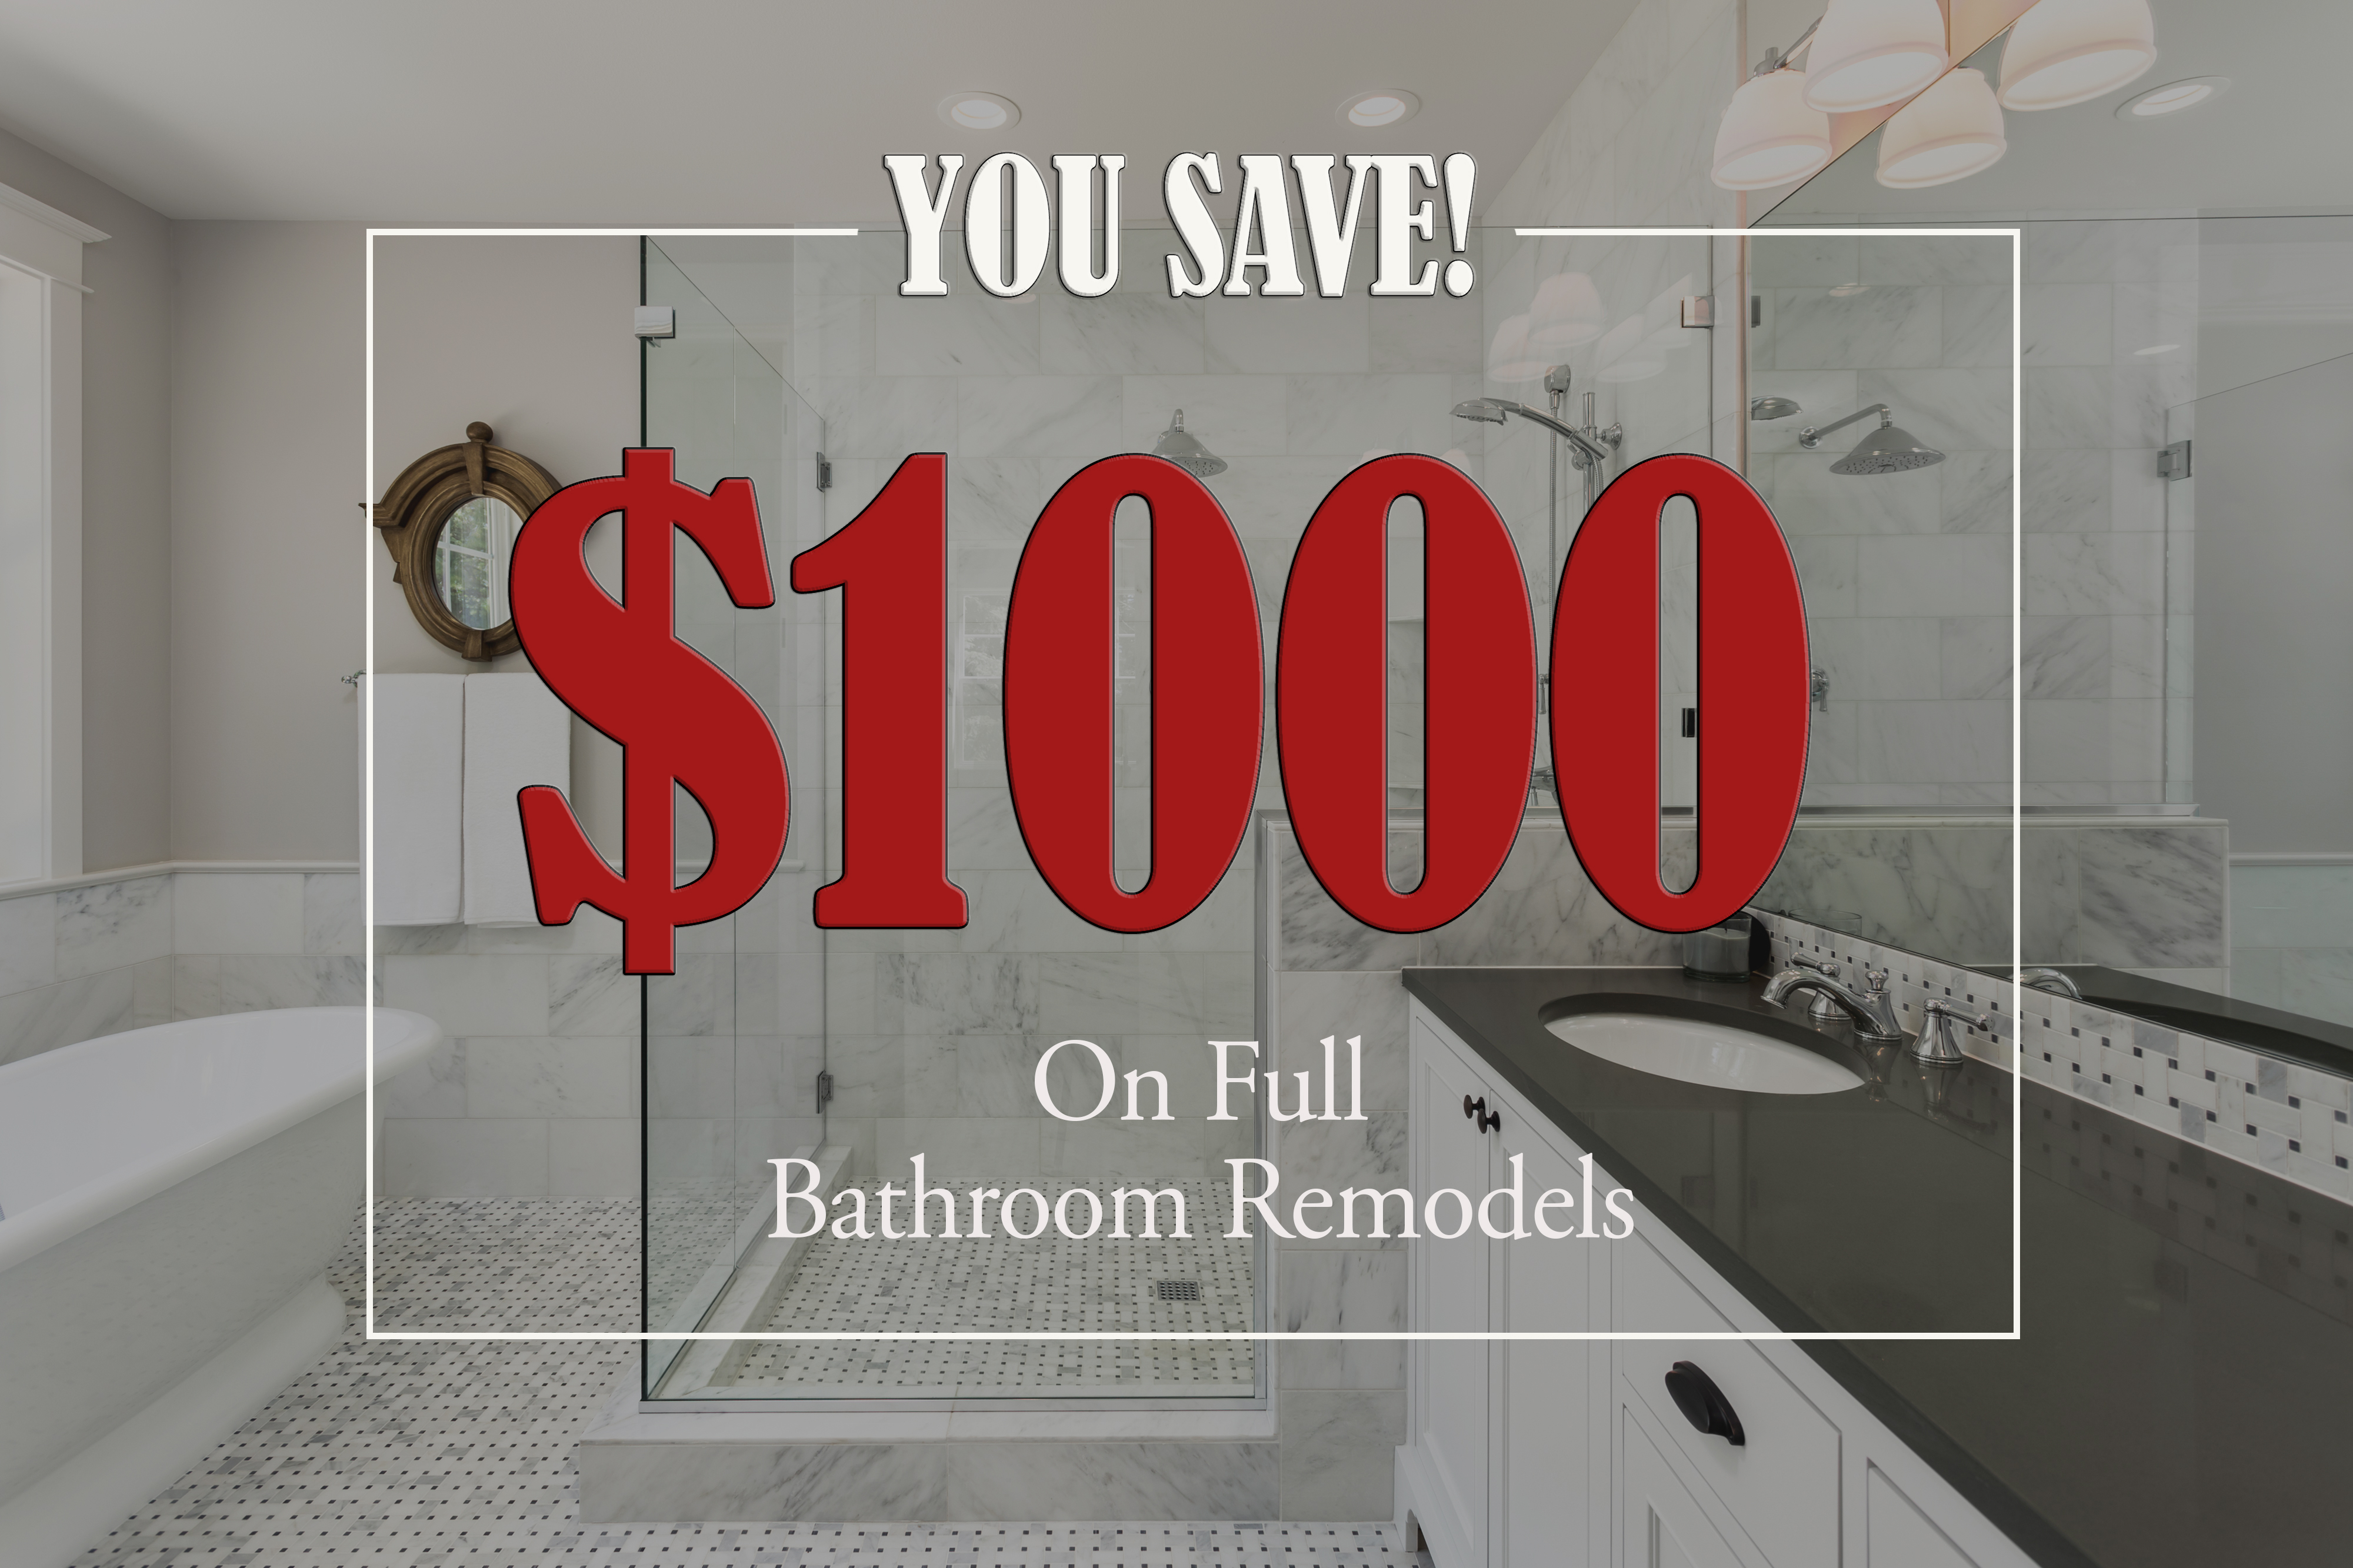 an image of a bathroom with red promotional text